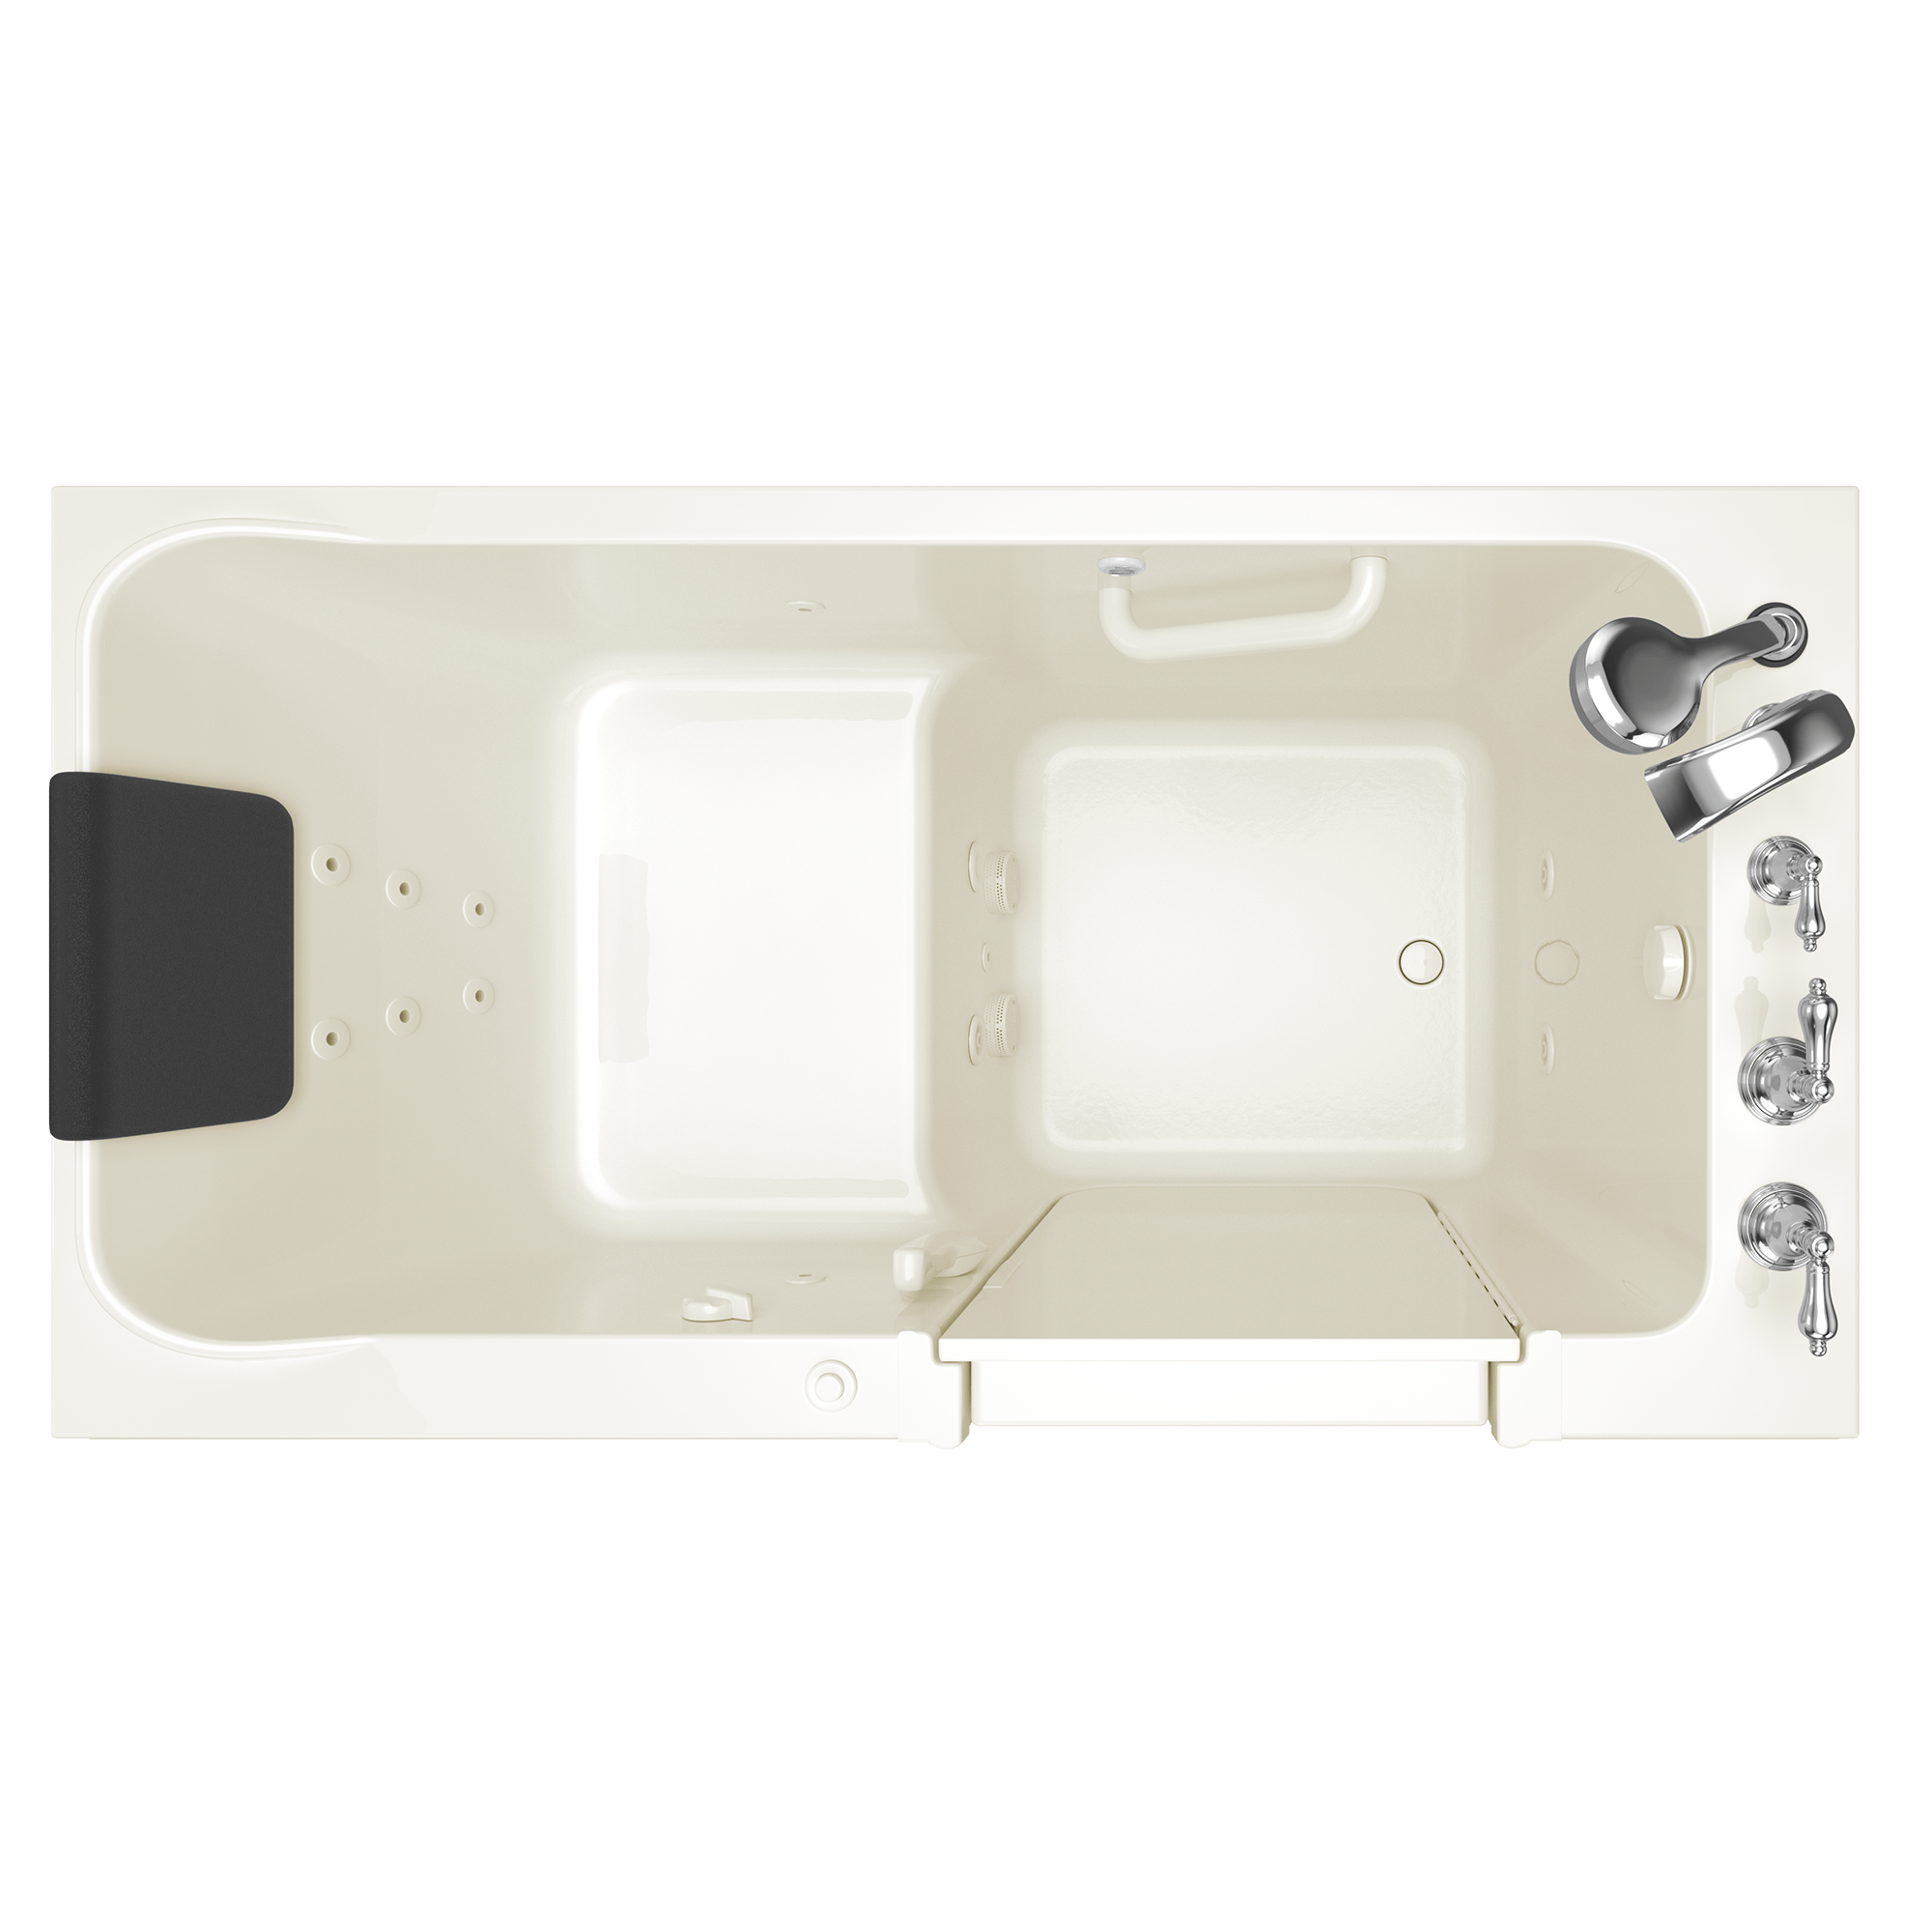 Acrylic Luxury Series 32 x 60 -Inch Walk-in Tub With Whirlpool System - Right-Hand Drain With Faucet